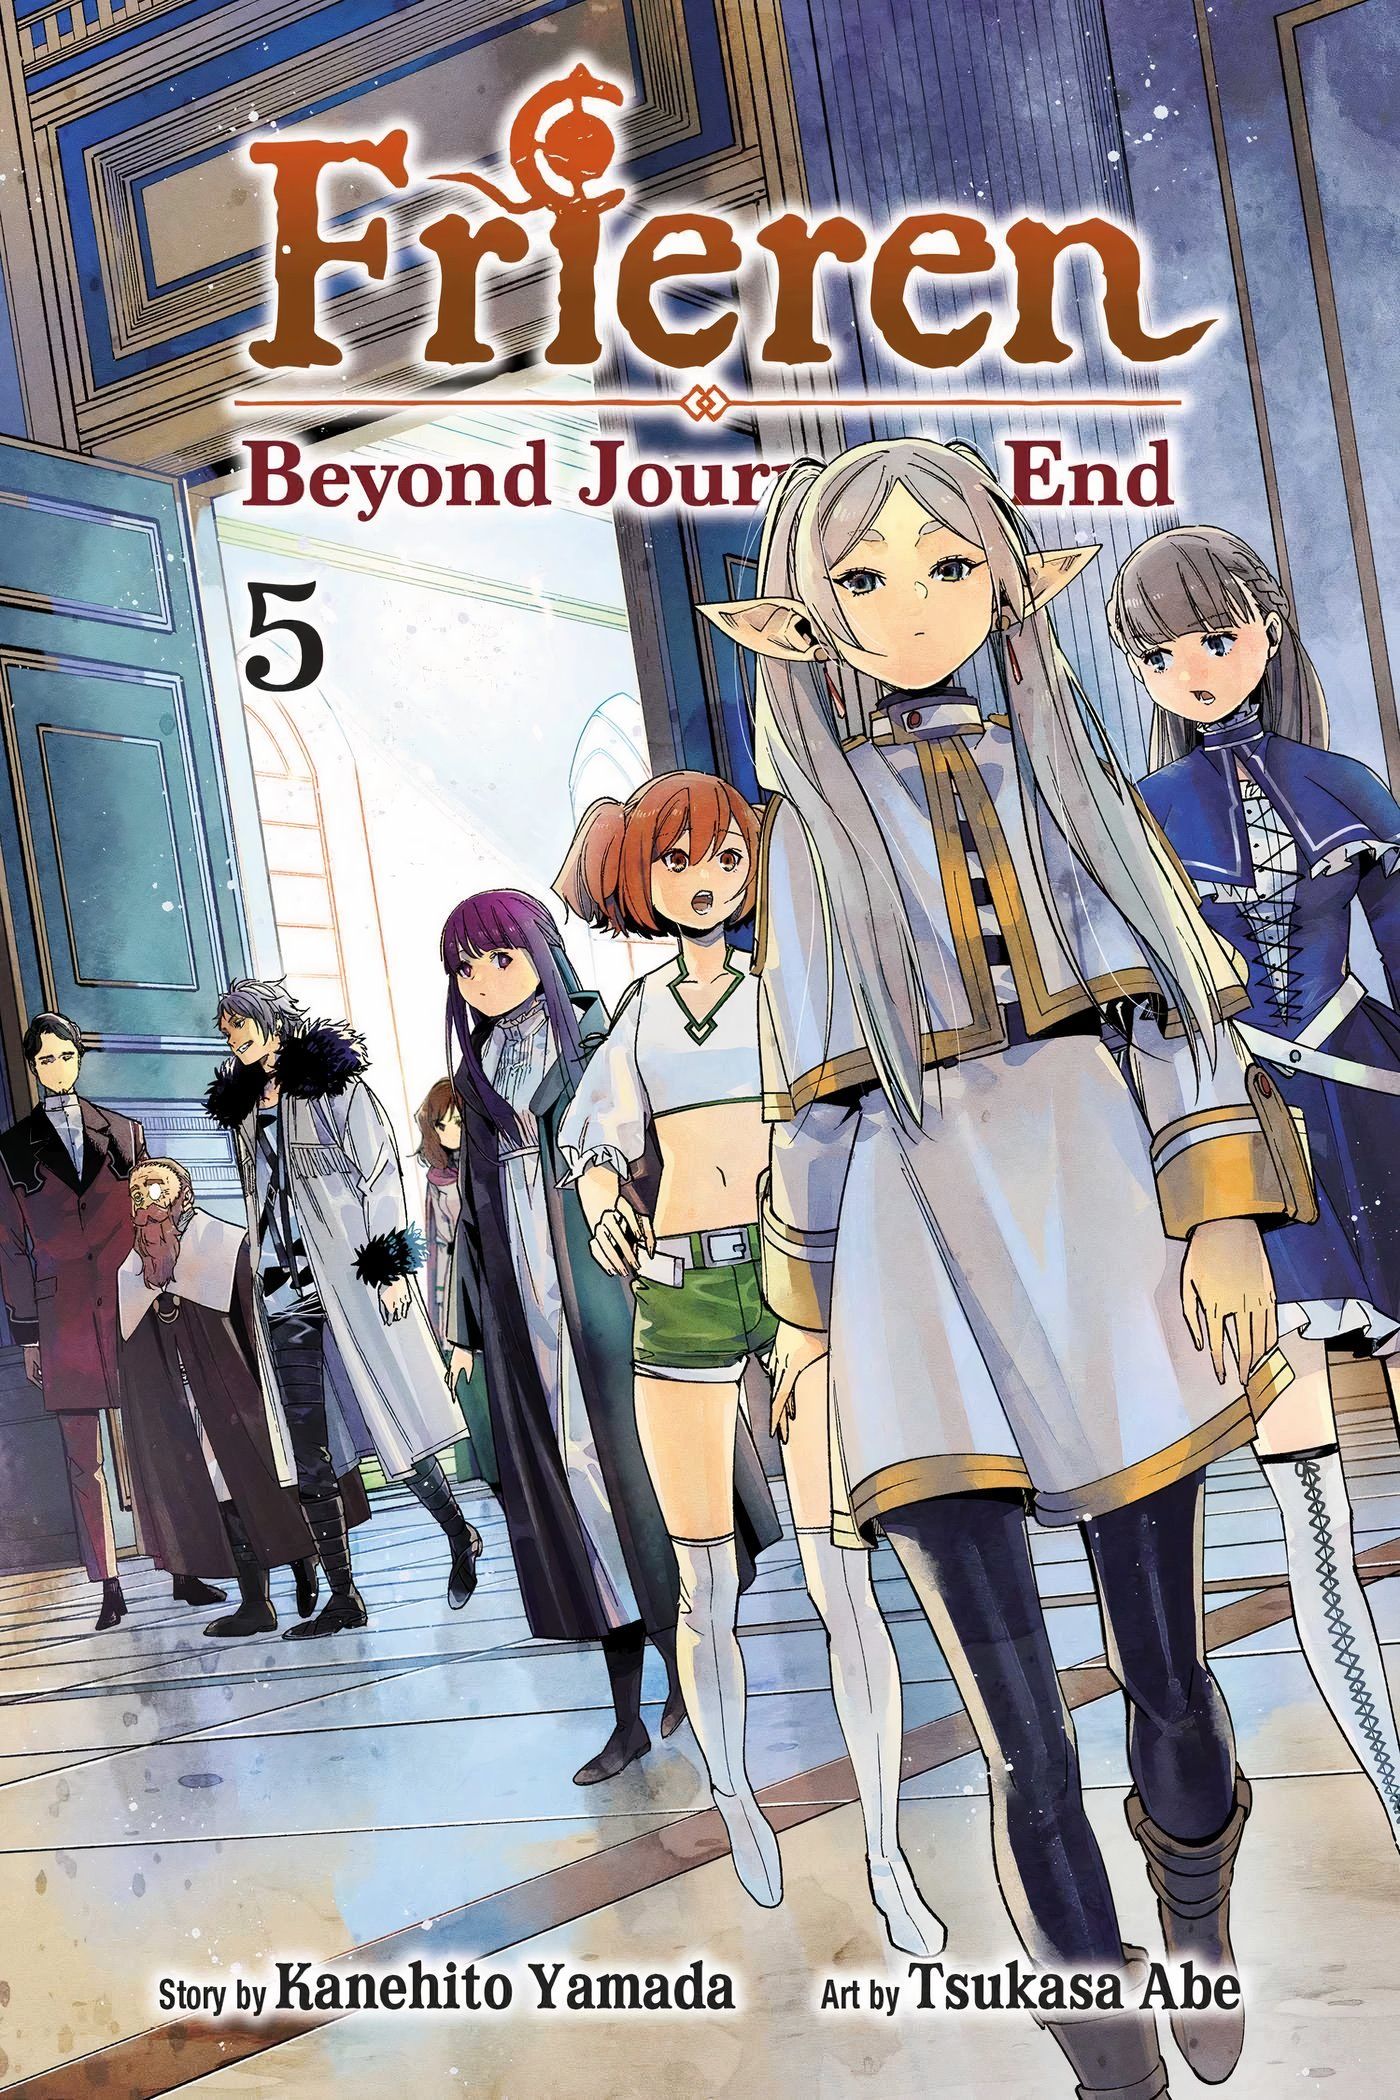 Frieren, Fern, Lawine, Kanne, Wirbel, Denken, and Richter entering the first portion of the First Class Mage Exam in Auwurst on the fifth cover of Frieren